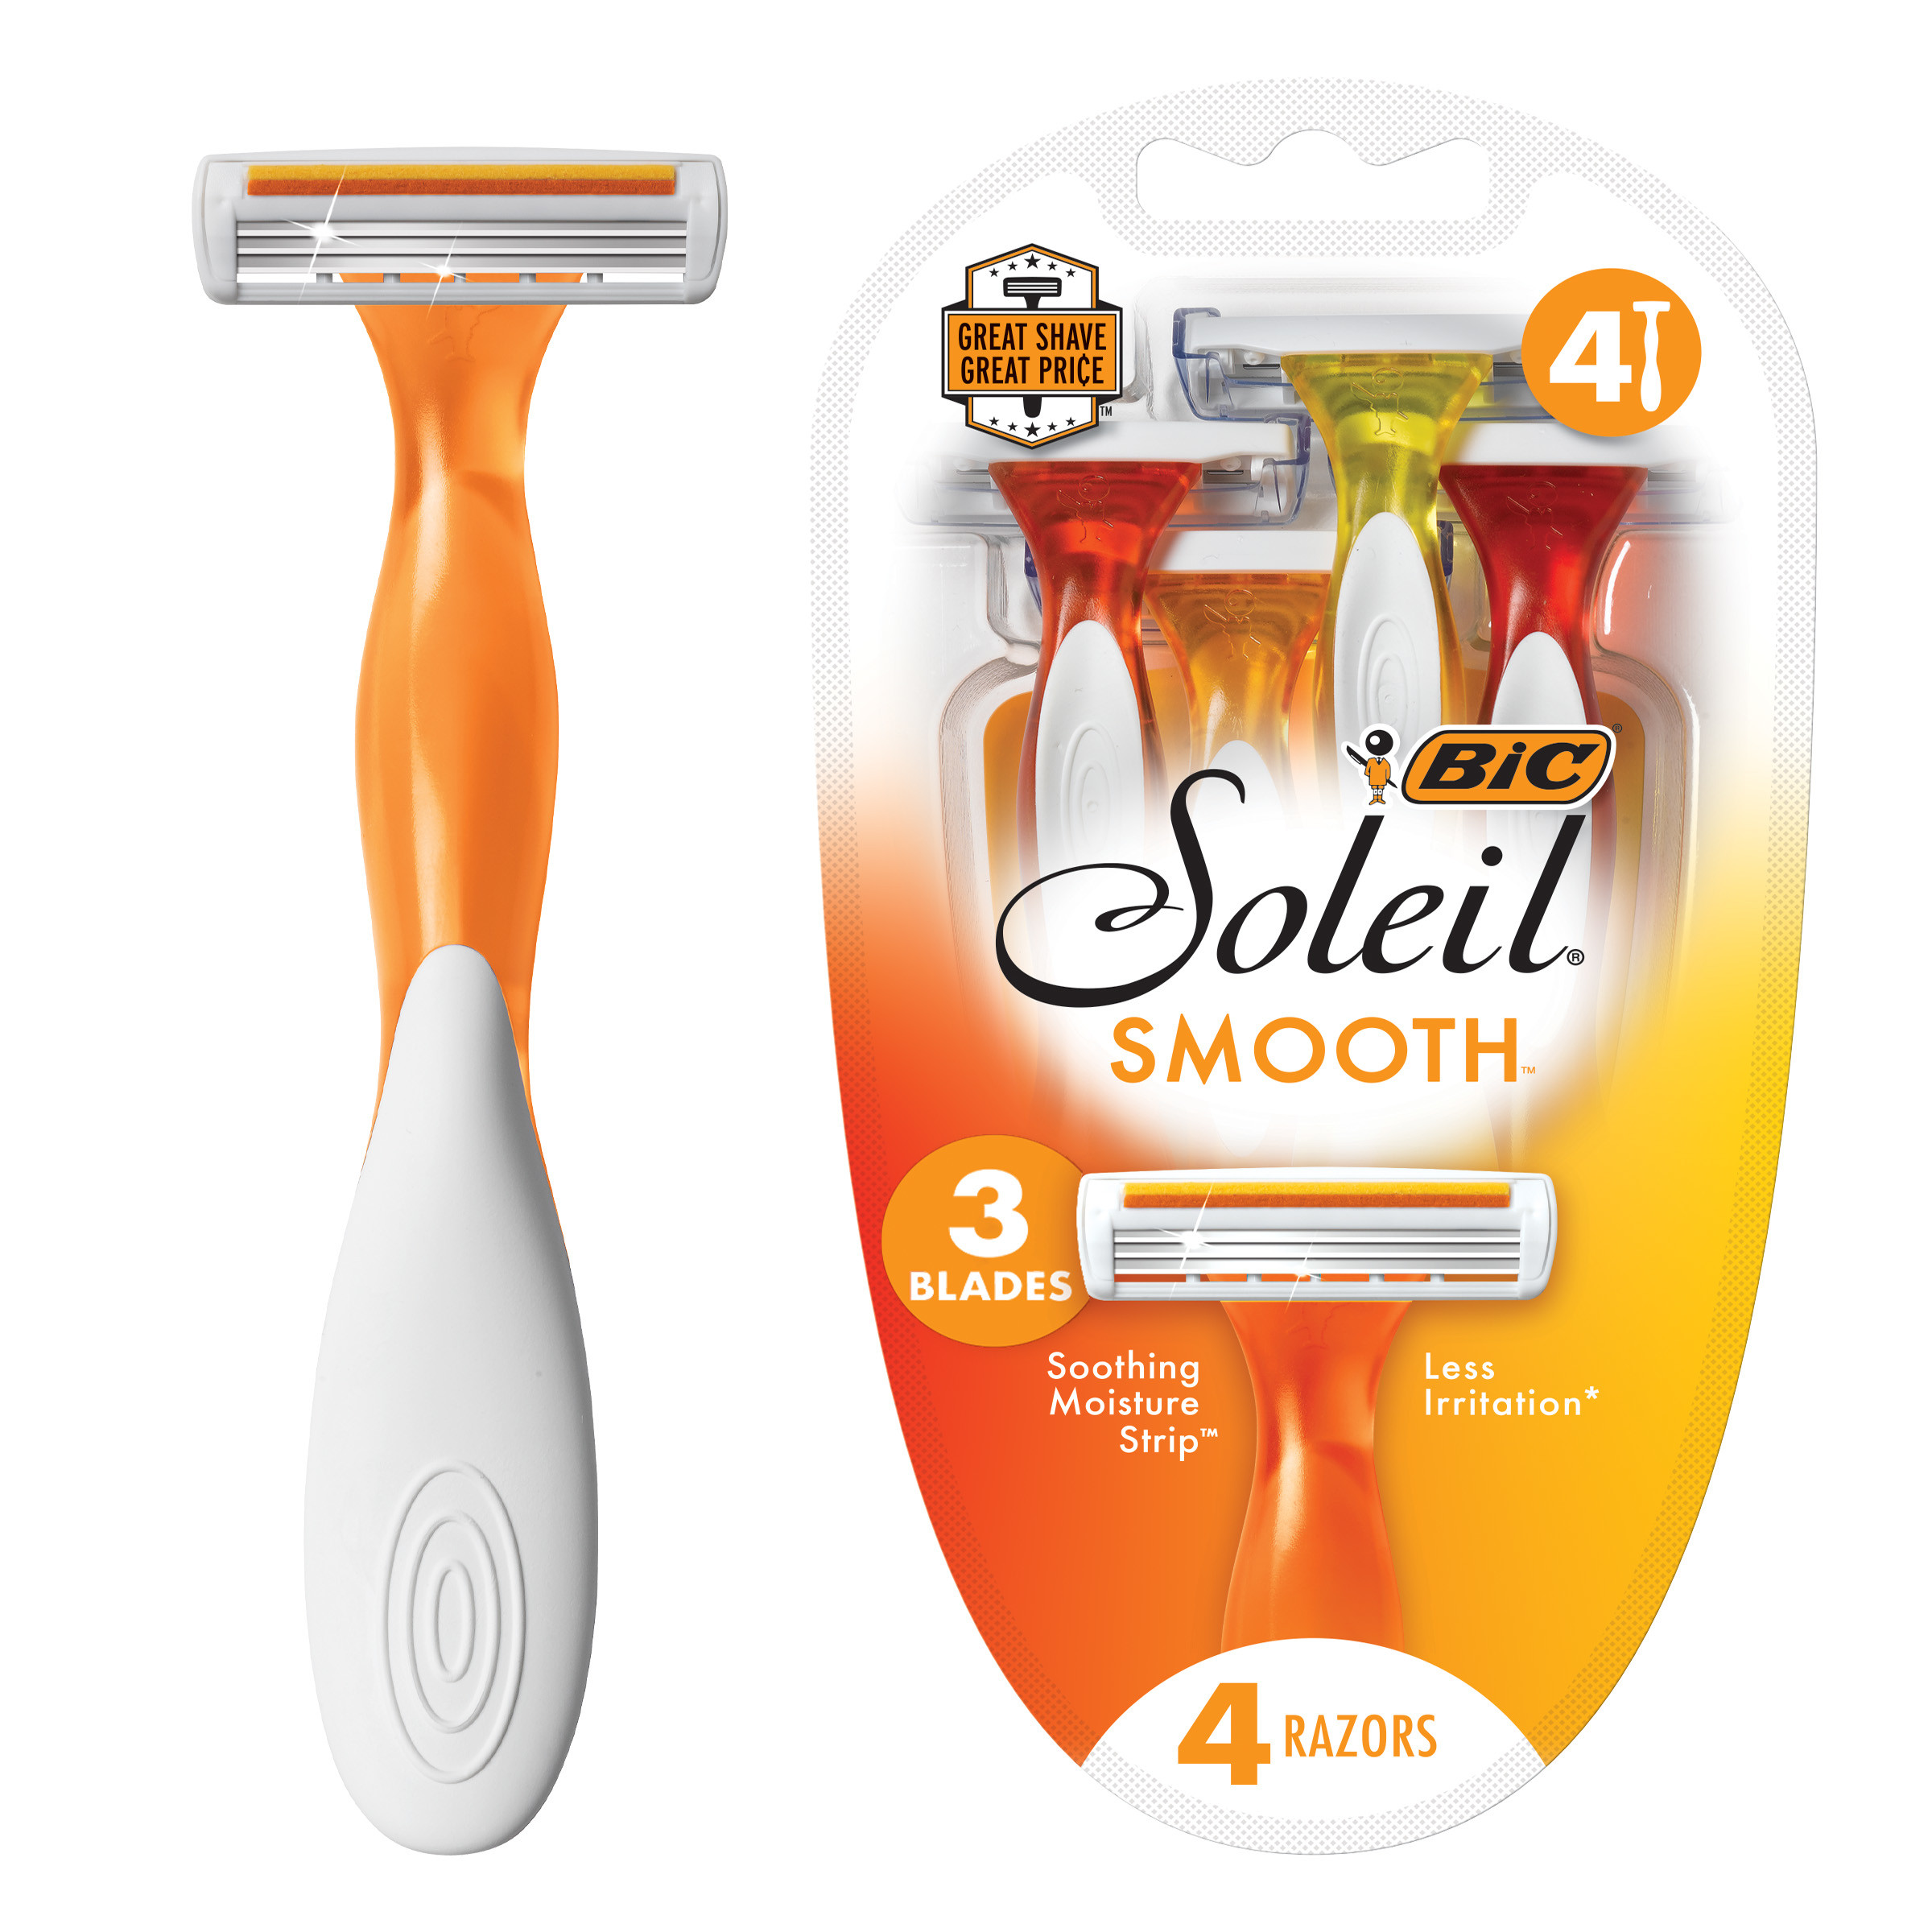 BIC Soleil Smooth Disposable Razors, Women's, 3-Blade, 4 Count - image 1 of 12